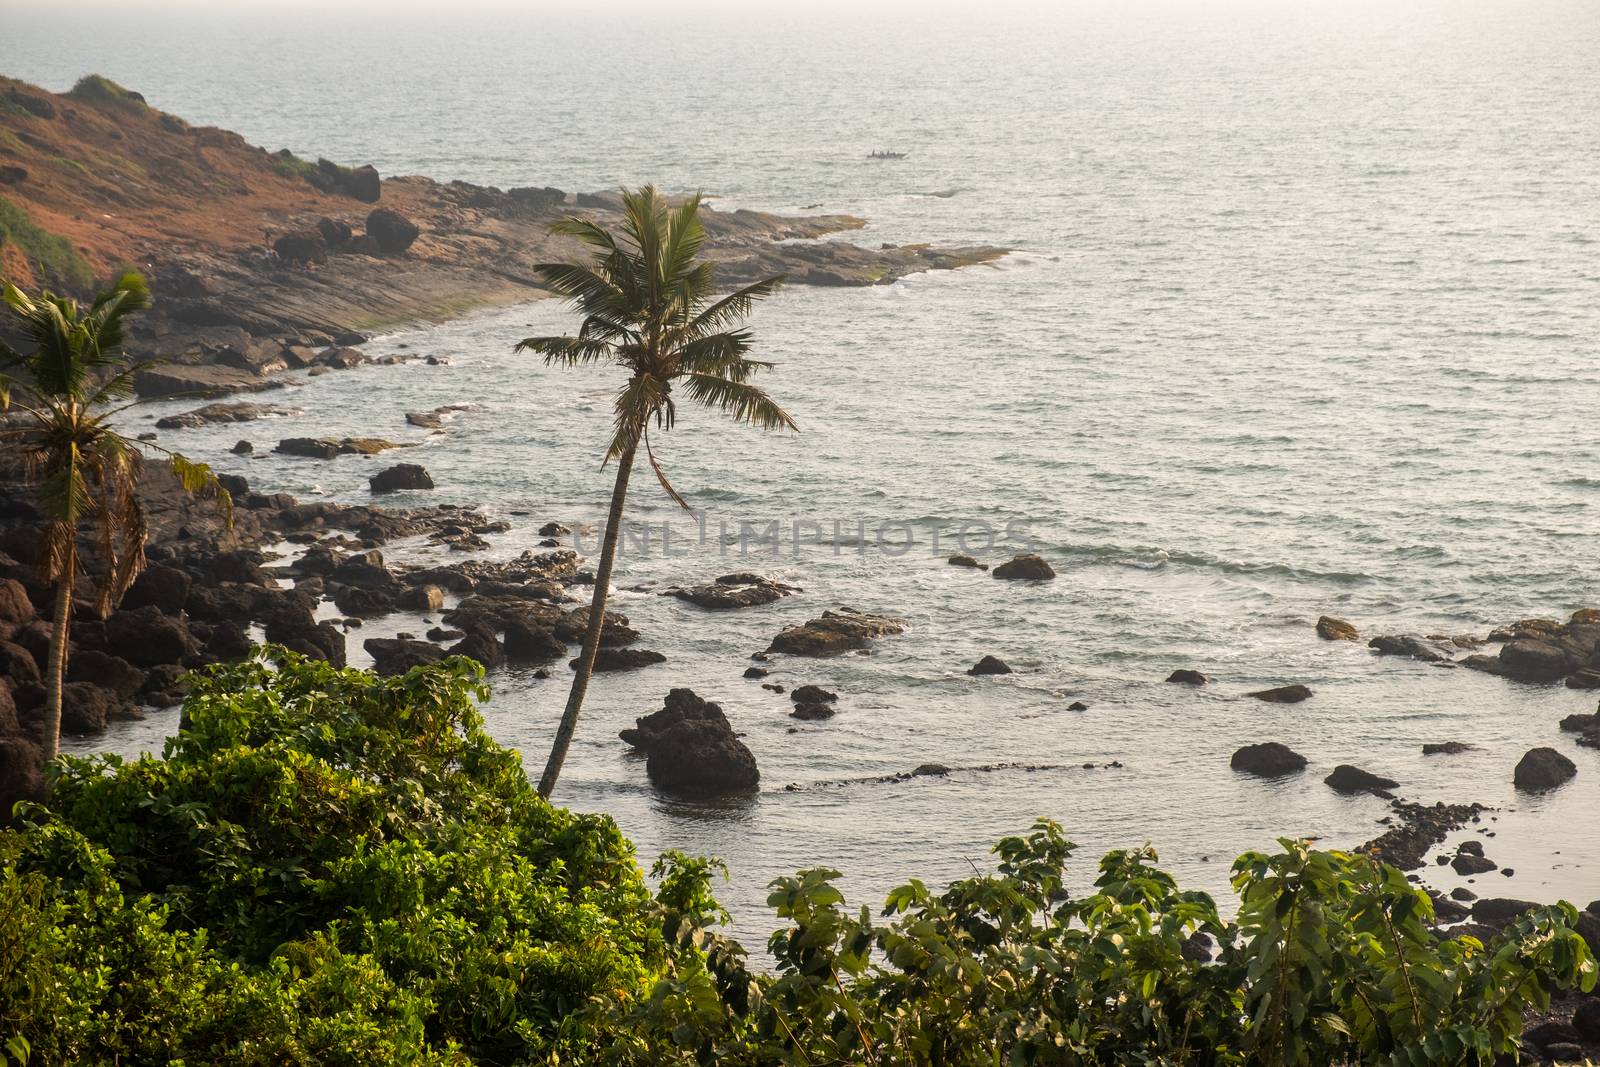 Coastline of the Northern Goa by snep_photo